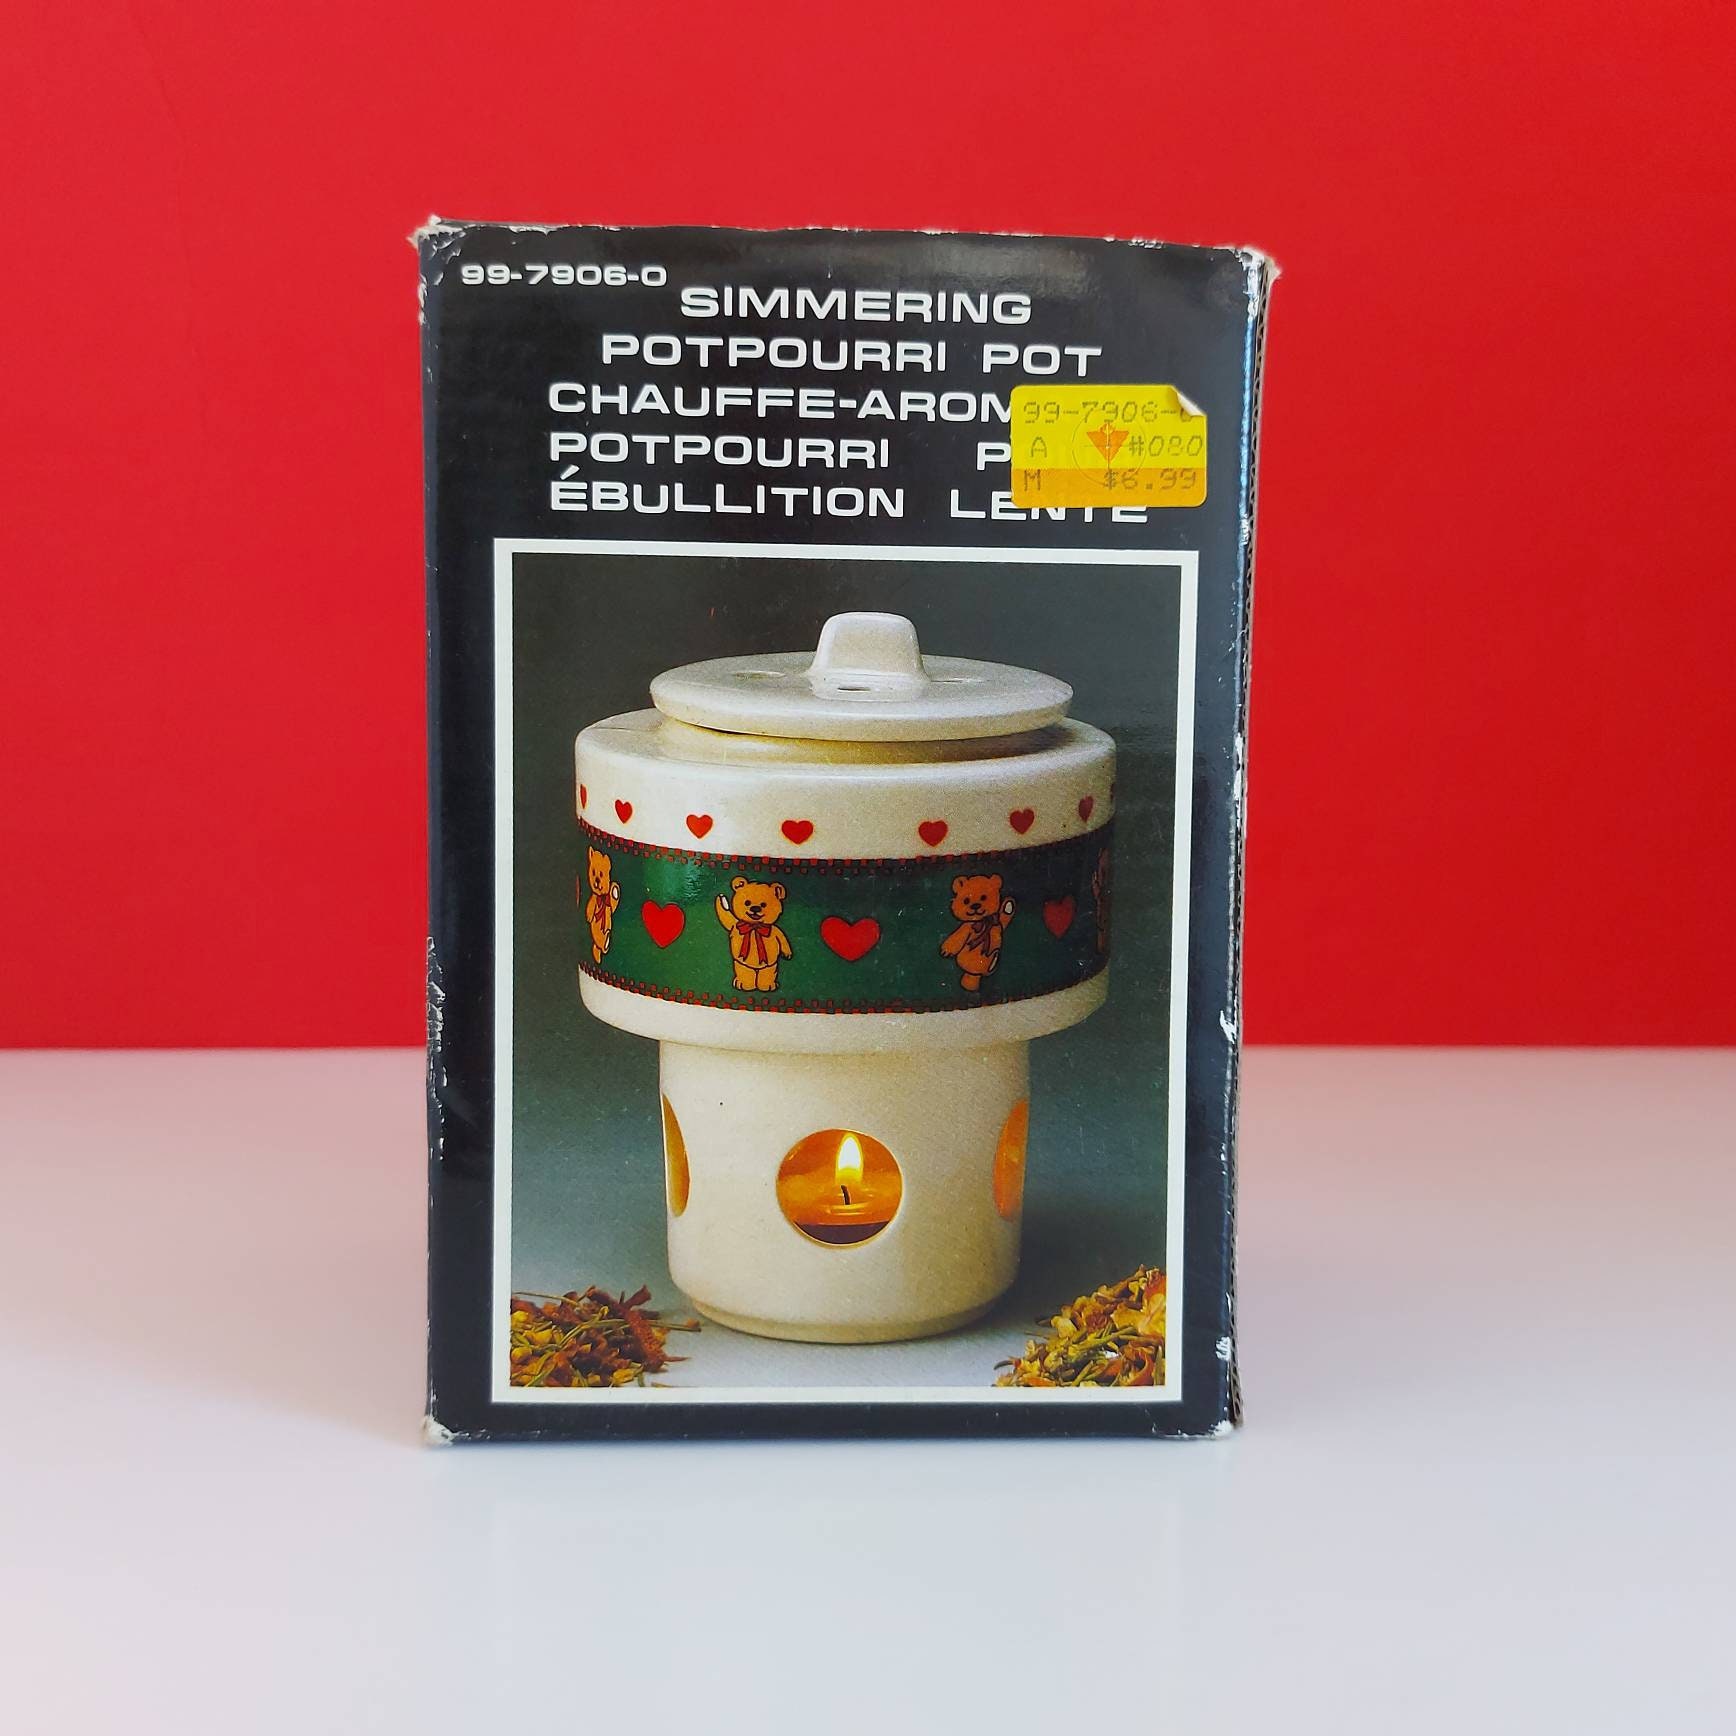 Elegant Expressions Brand Black Electric Simmering Ceramic Potpourri Warmer  - New in the box - Model # CCW-010 or #H94083WS for Sale in Great Mills, MD  - OfferUp